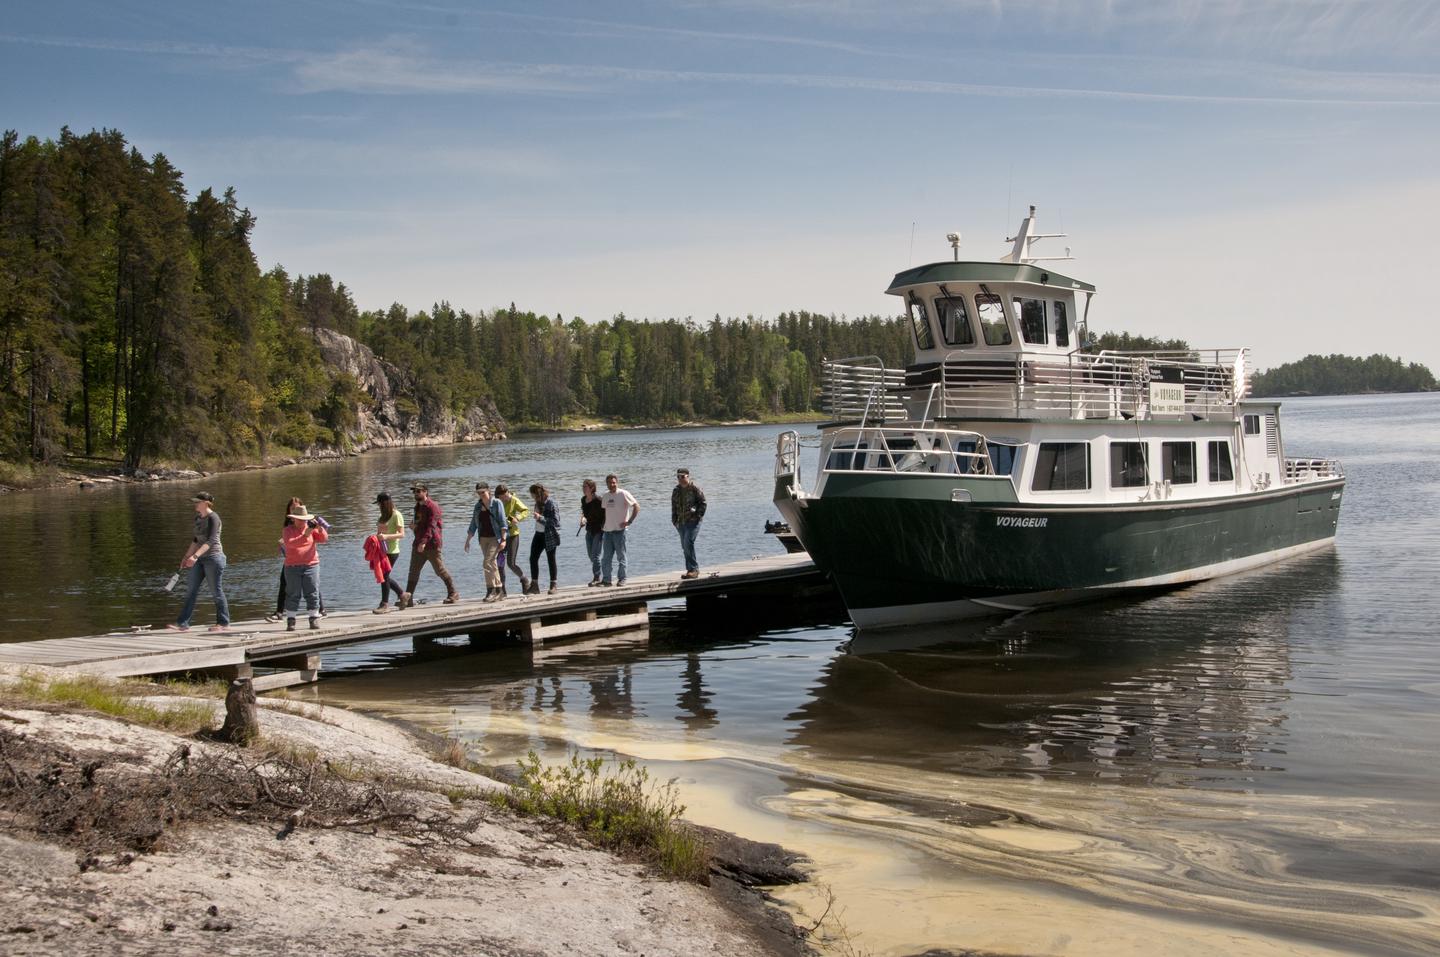 The Voyageur tour boat docked at the Anderson Bay Trailhead and visitors walking on the dock